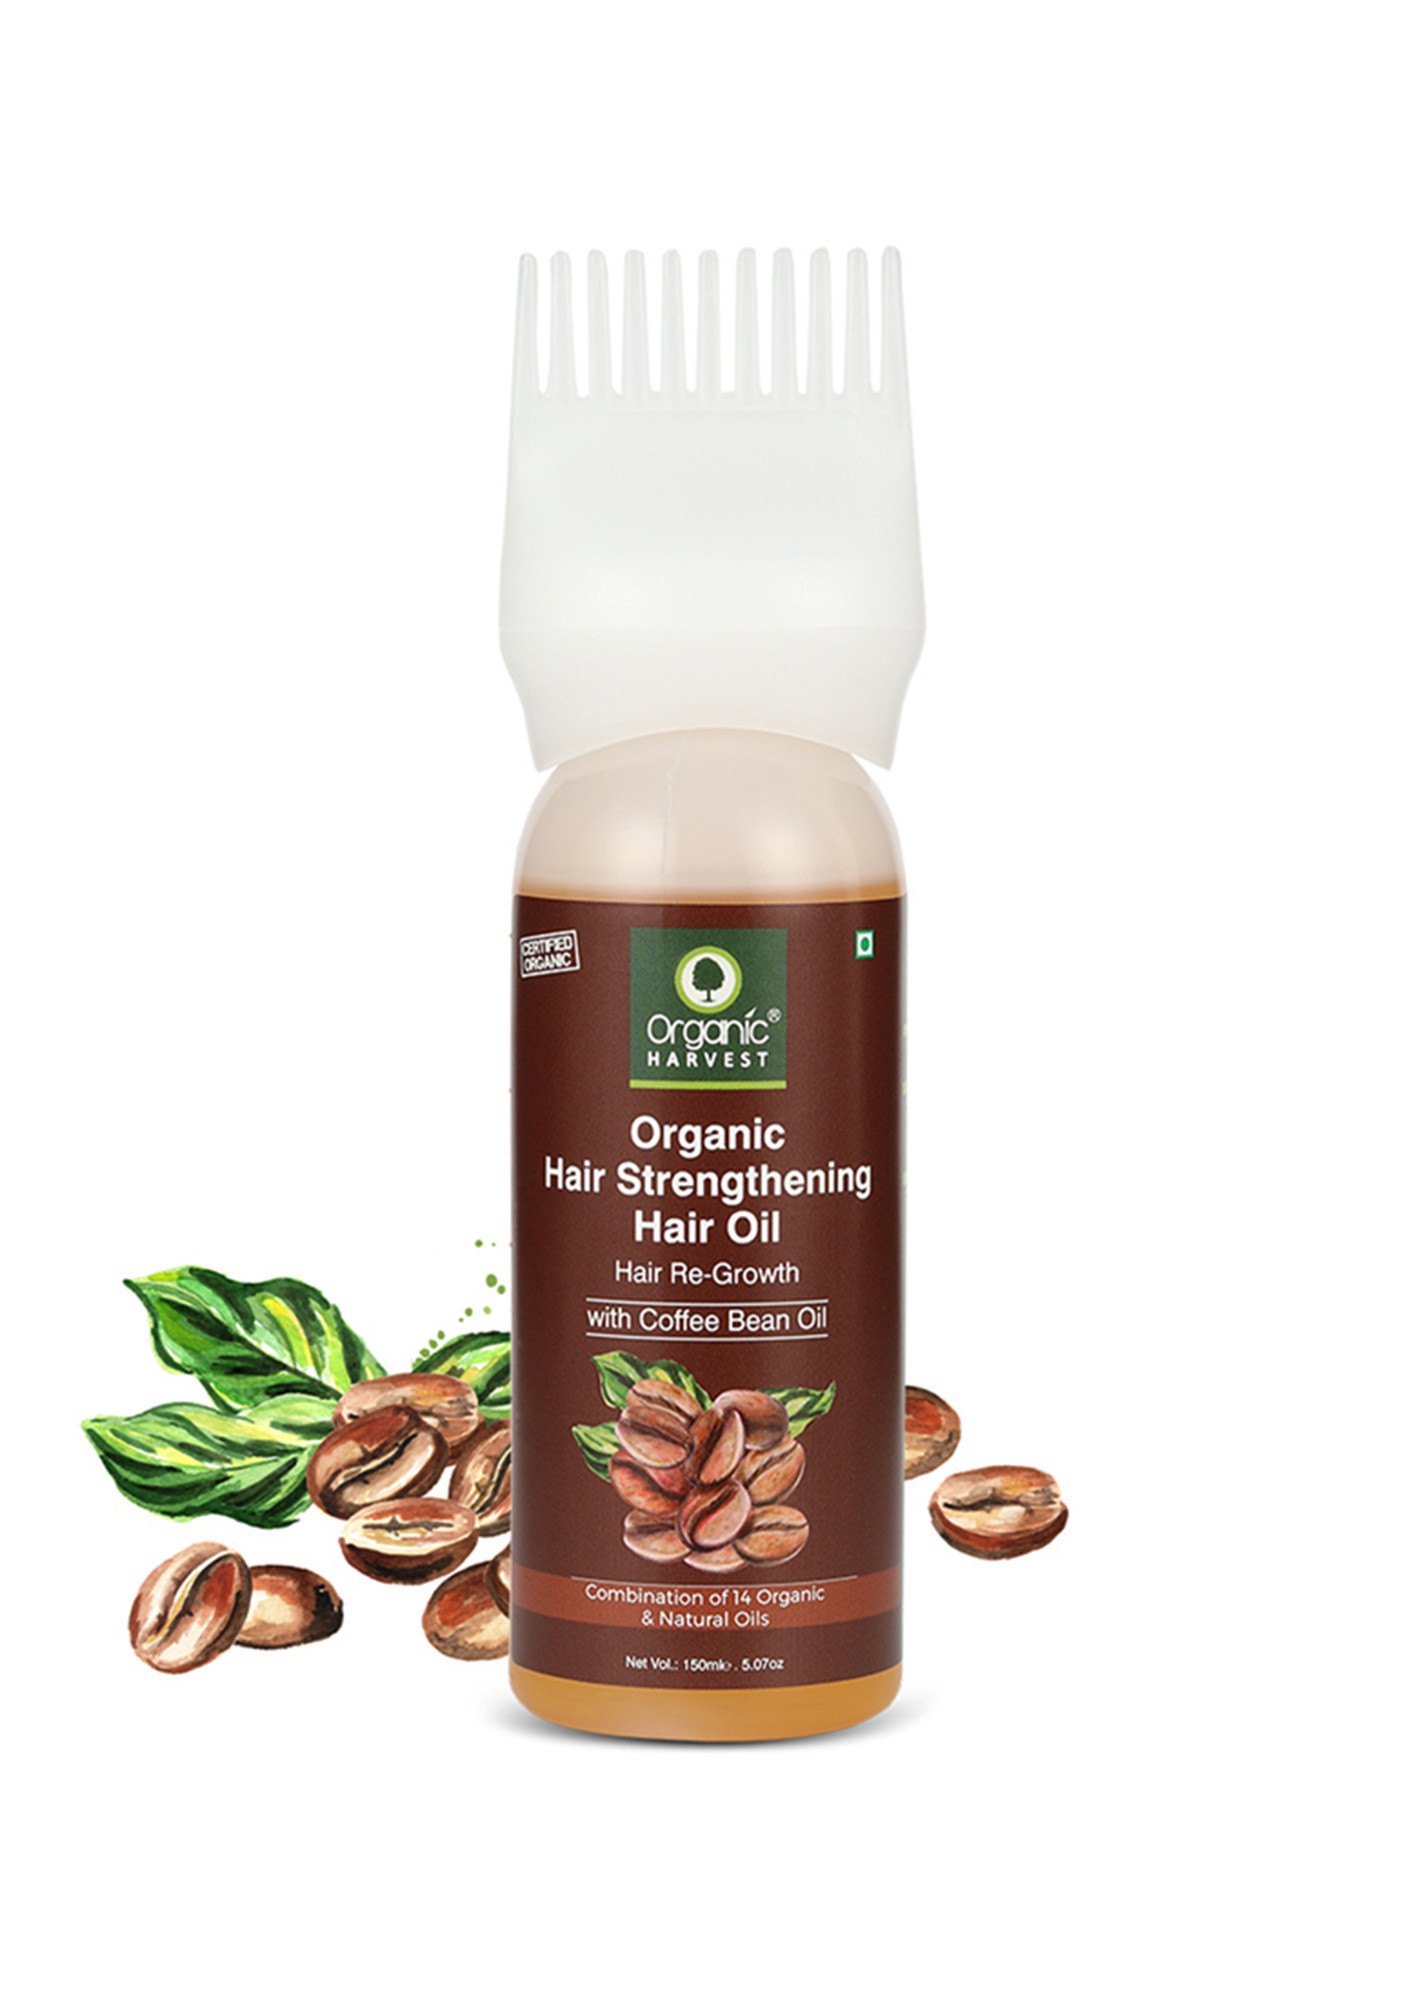 Buy Organic Harvest Hair Strengthening Hair Oil Infused with Coffee Beans  and a Combination of 14 Organic Natural Oils Helps Improve Hair Structure  and Growth Paraben and Sulphate Free  150 ml